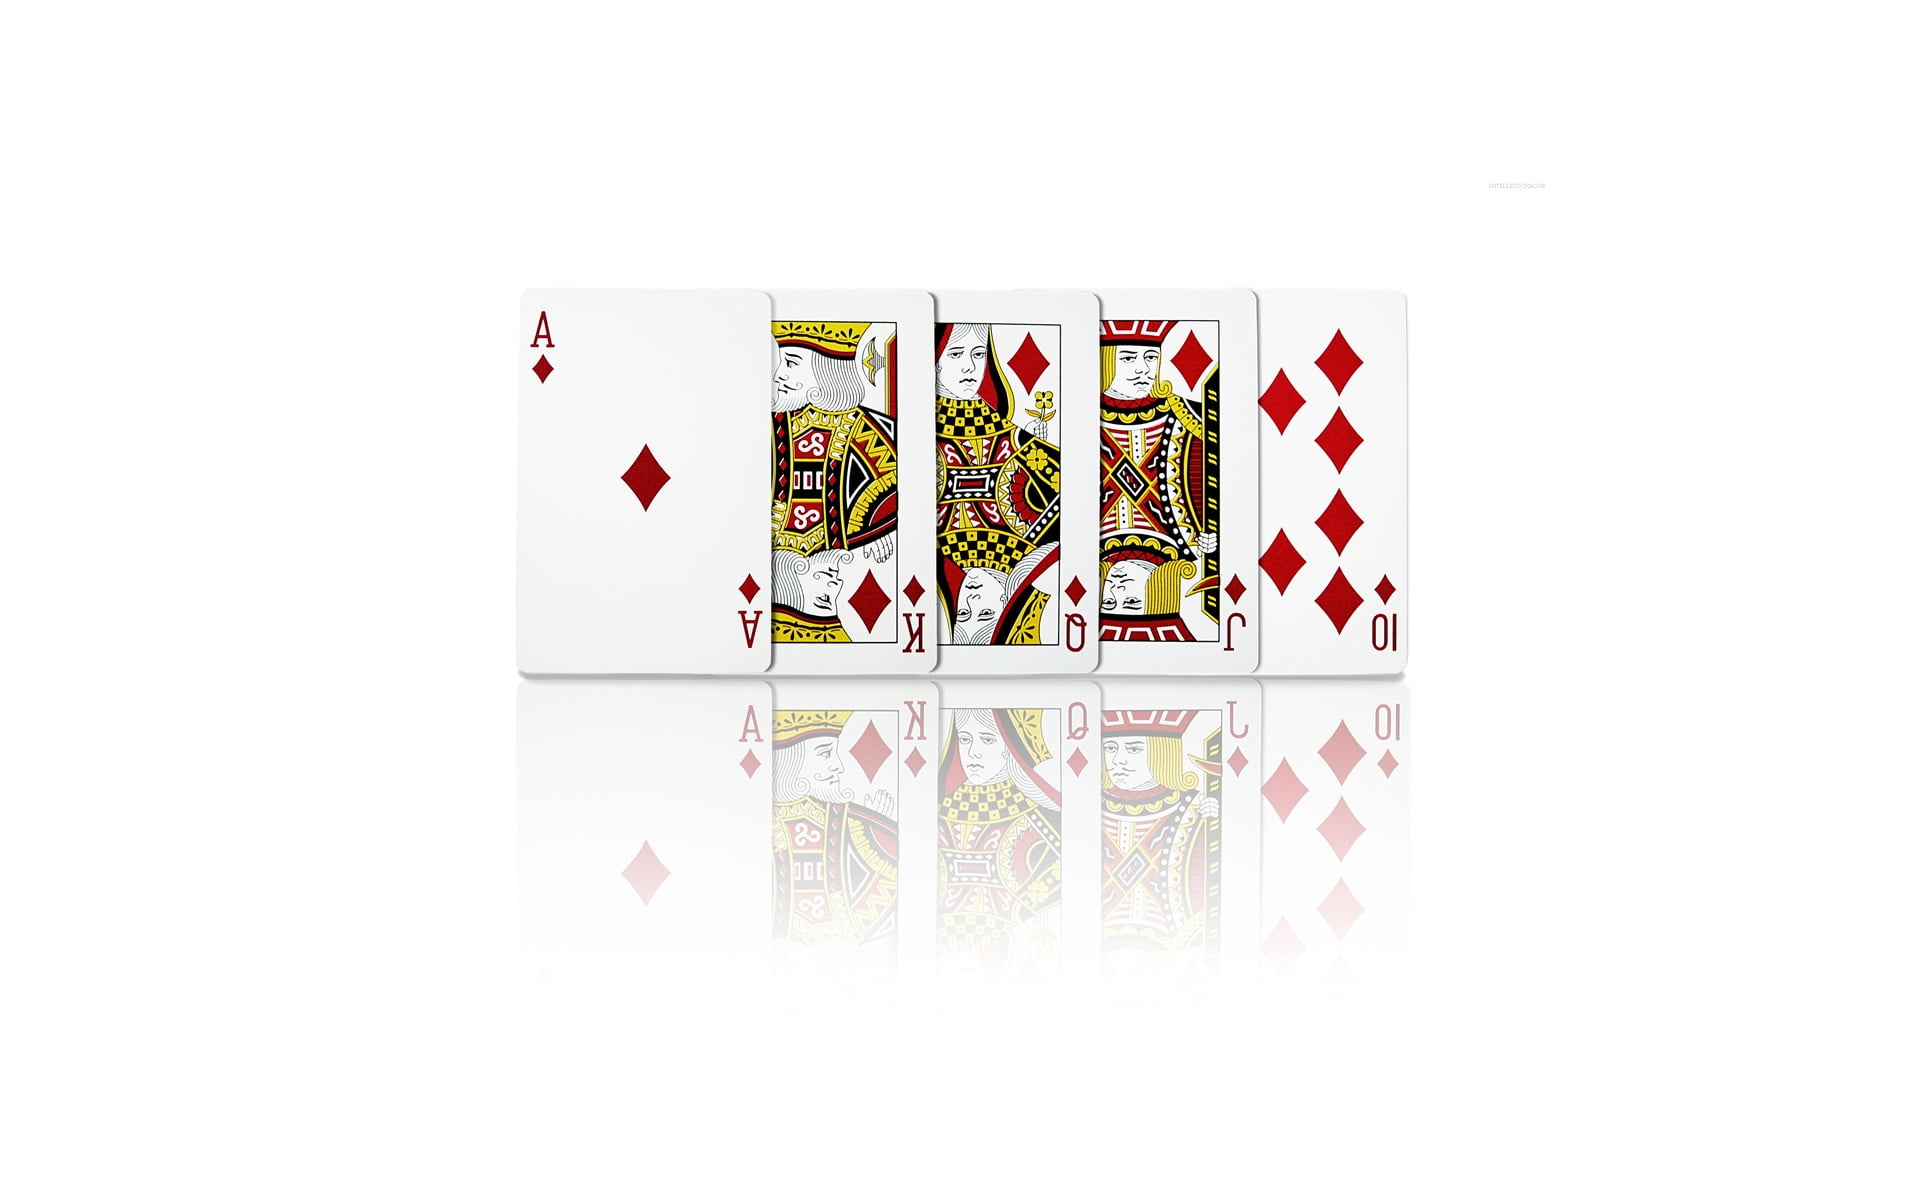 Ace, King, Queen, Jack, and 10 diamond playing cards